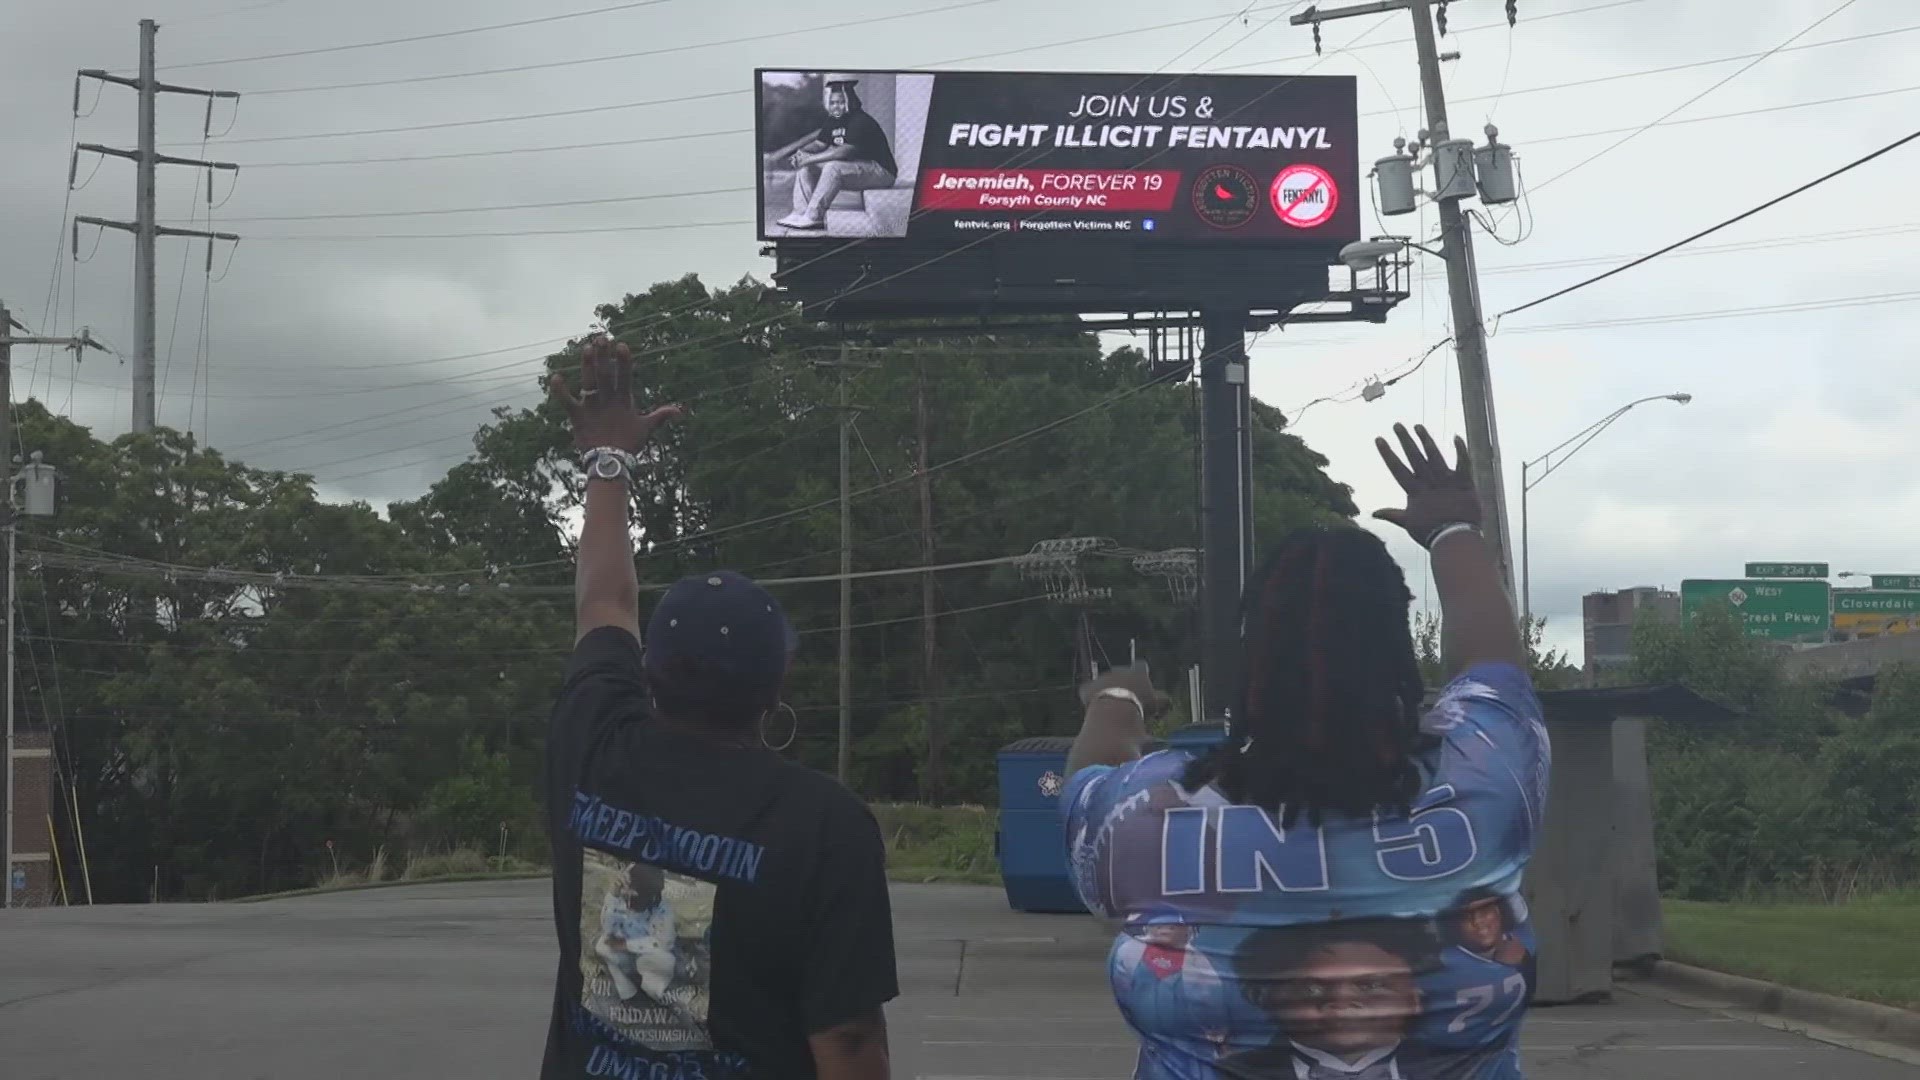 Jeremiah Scales and 18 other faces are in rotation on two Winston-Salem billboards along Business 40.